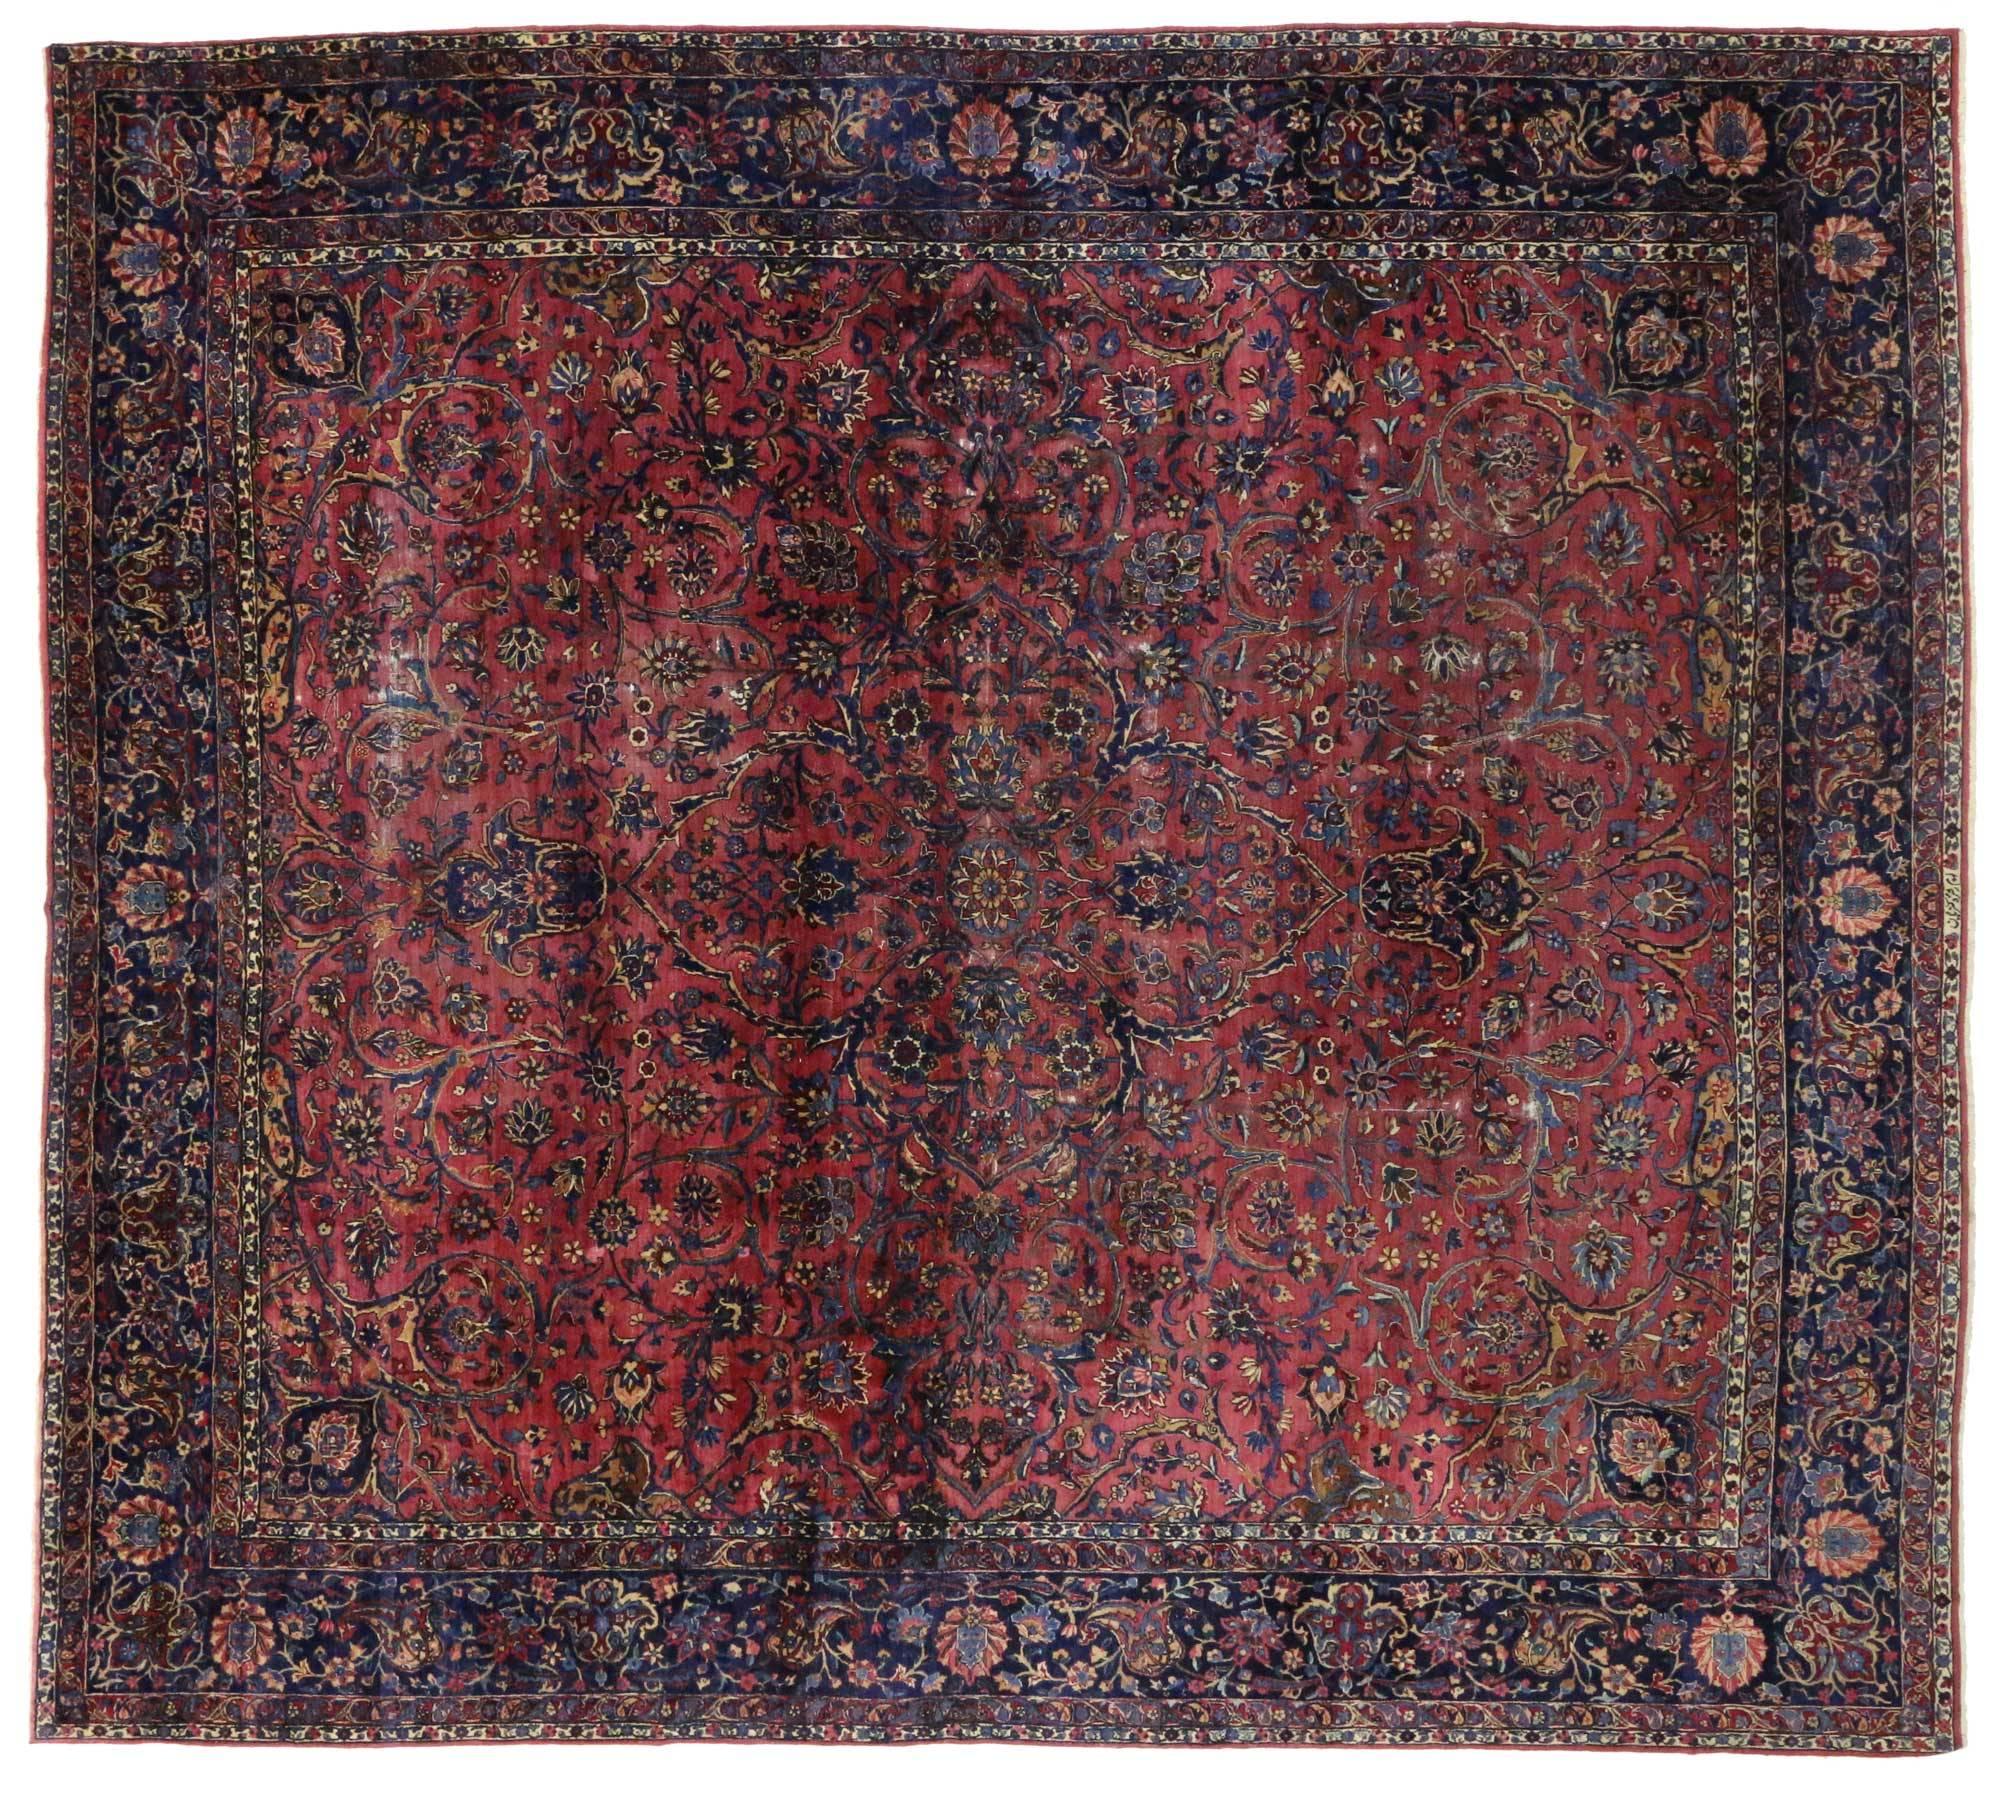 Hand-Knotted Antique Persian Kerman Rug with Luxe Victorian Regency Style